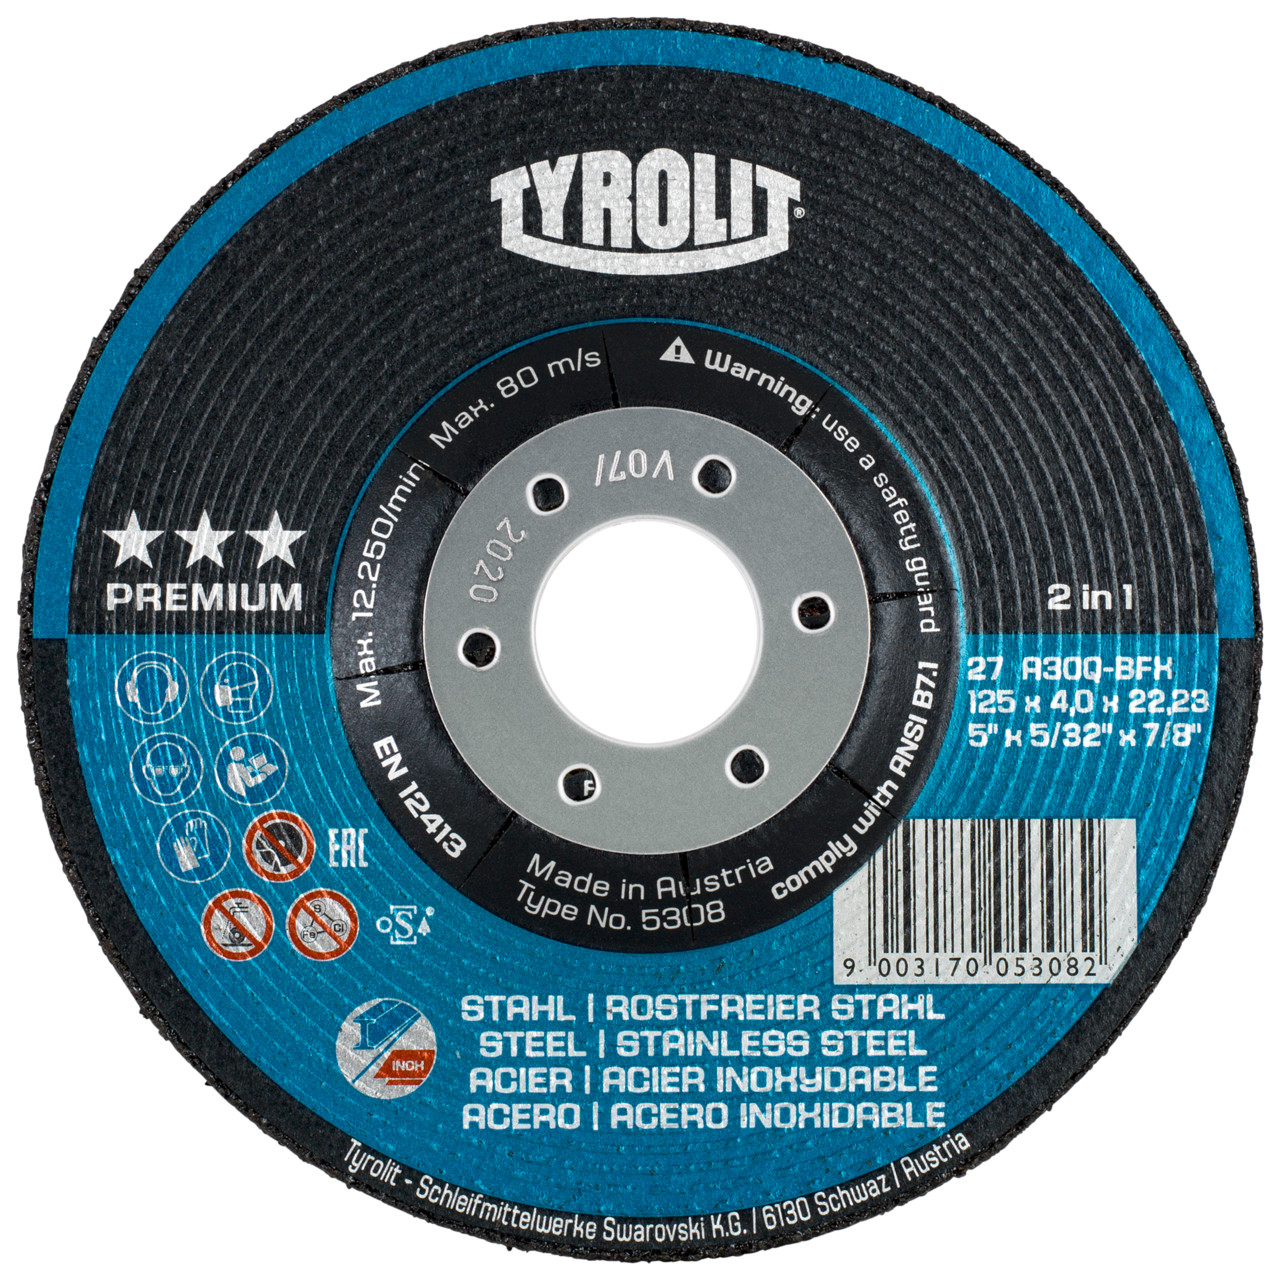 TYROLIT grinding wheel DxUxH 150x7x22.23 2in1 for steel and stainless steel, shape: 27 - offset version, Art. 34046132